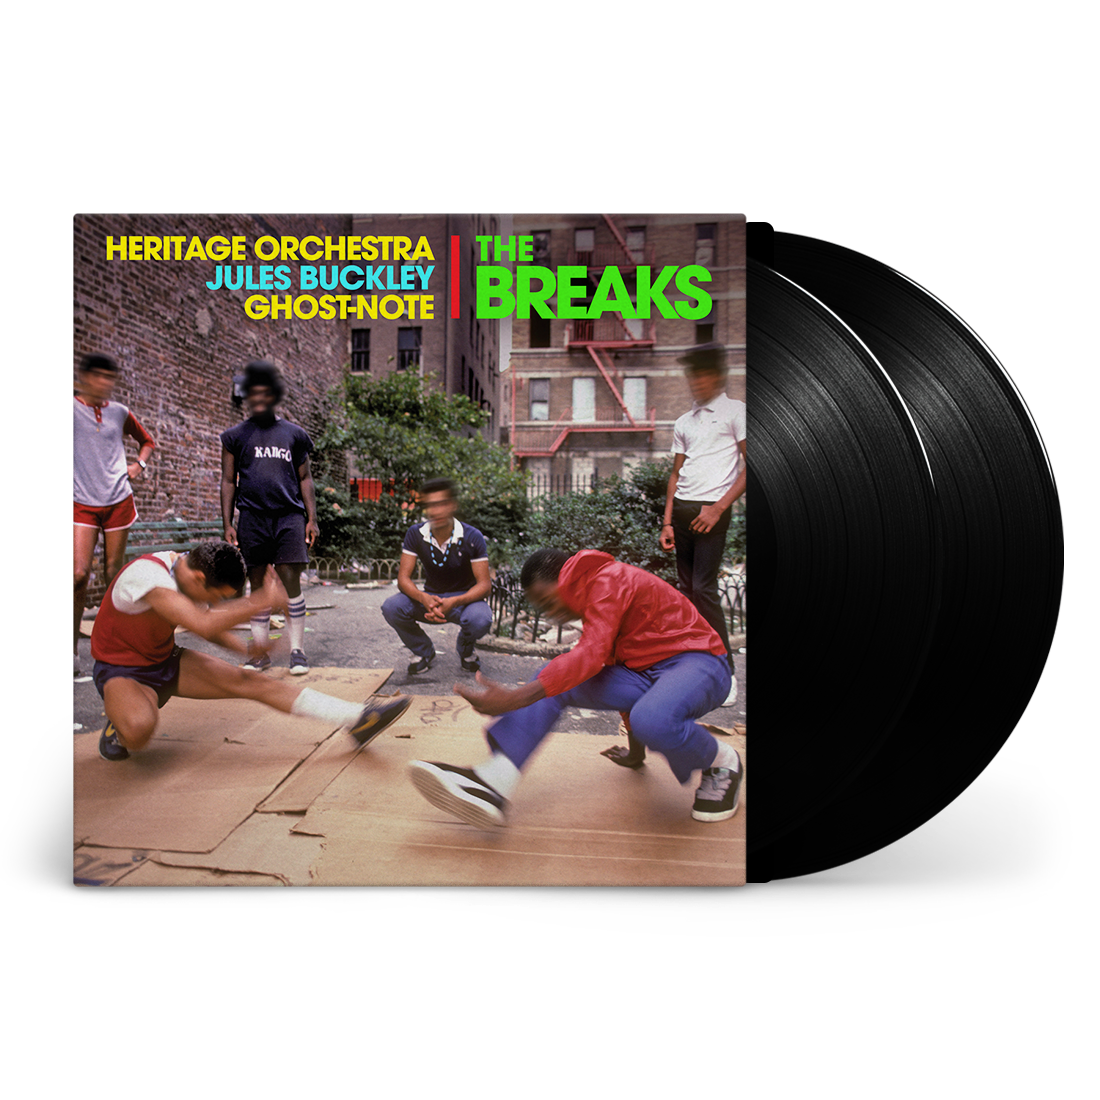 The Heritage Orchestra, Jules Buckley, Ghost-Note - The Breaks: Vinyl 2LP